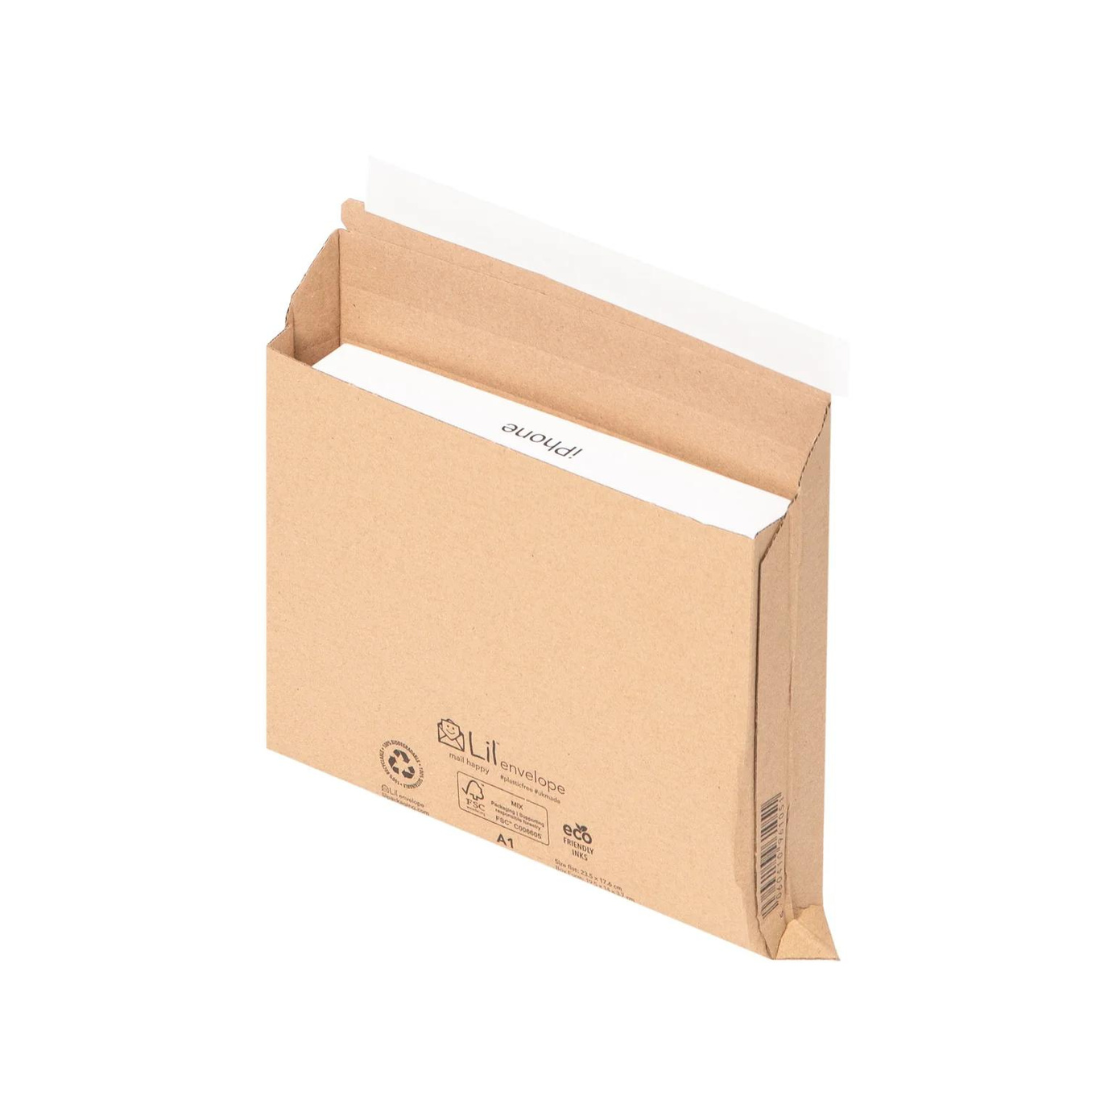 A1 DVD/A5 Size Cardboard Envelope Mailer - Fits 100% of DVDs, Blu Rays & video games (PACK OF 50)